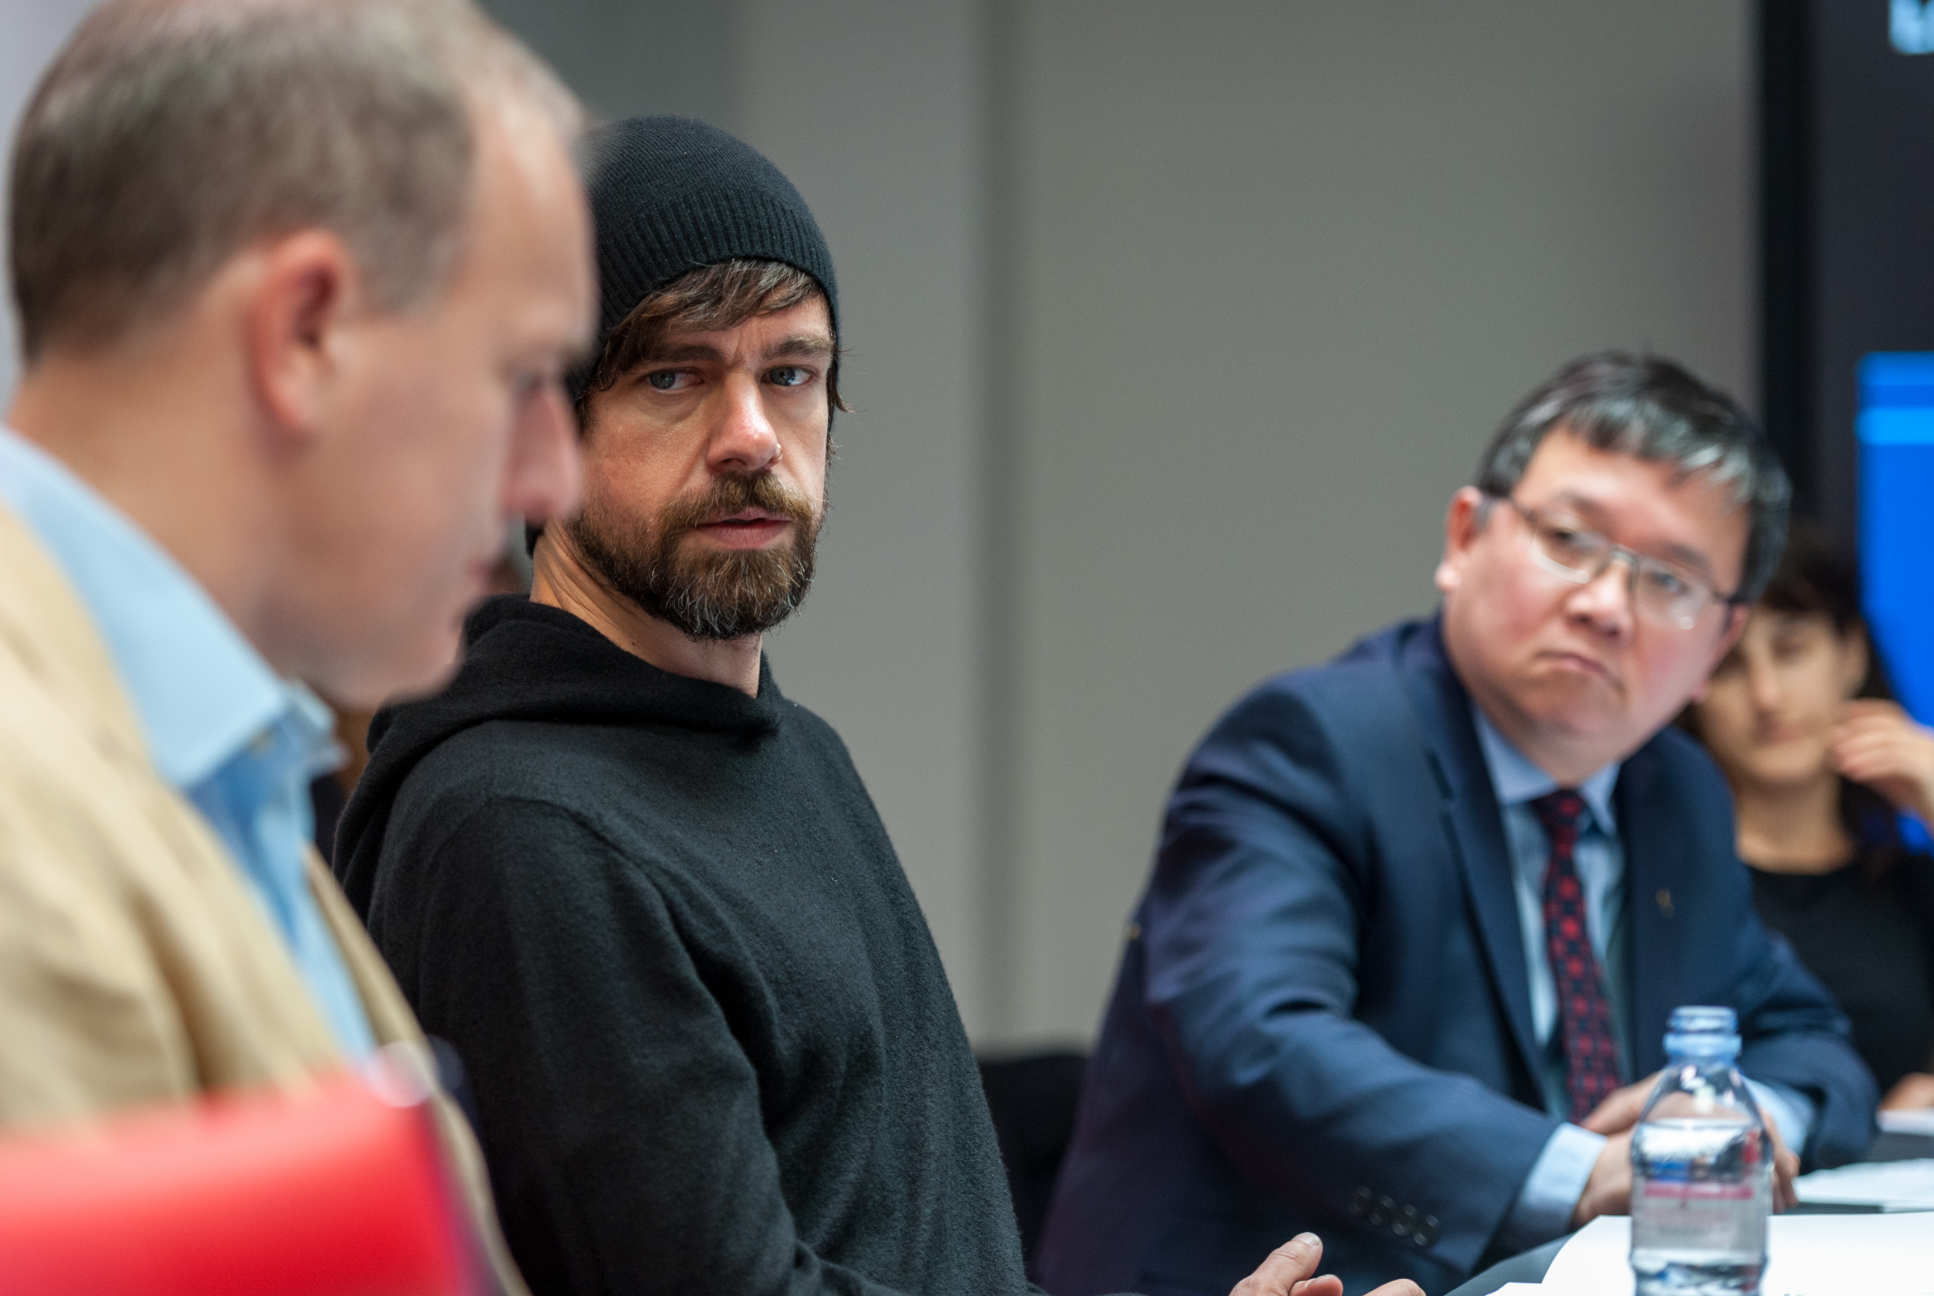 Jack Dorsey at the roundtable